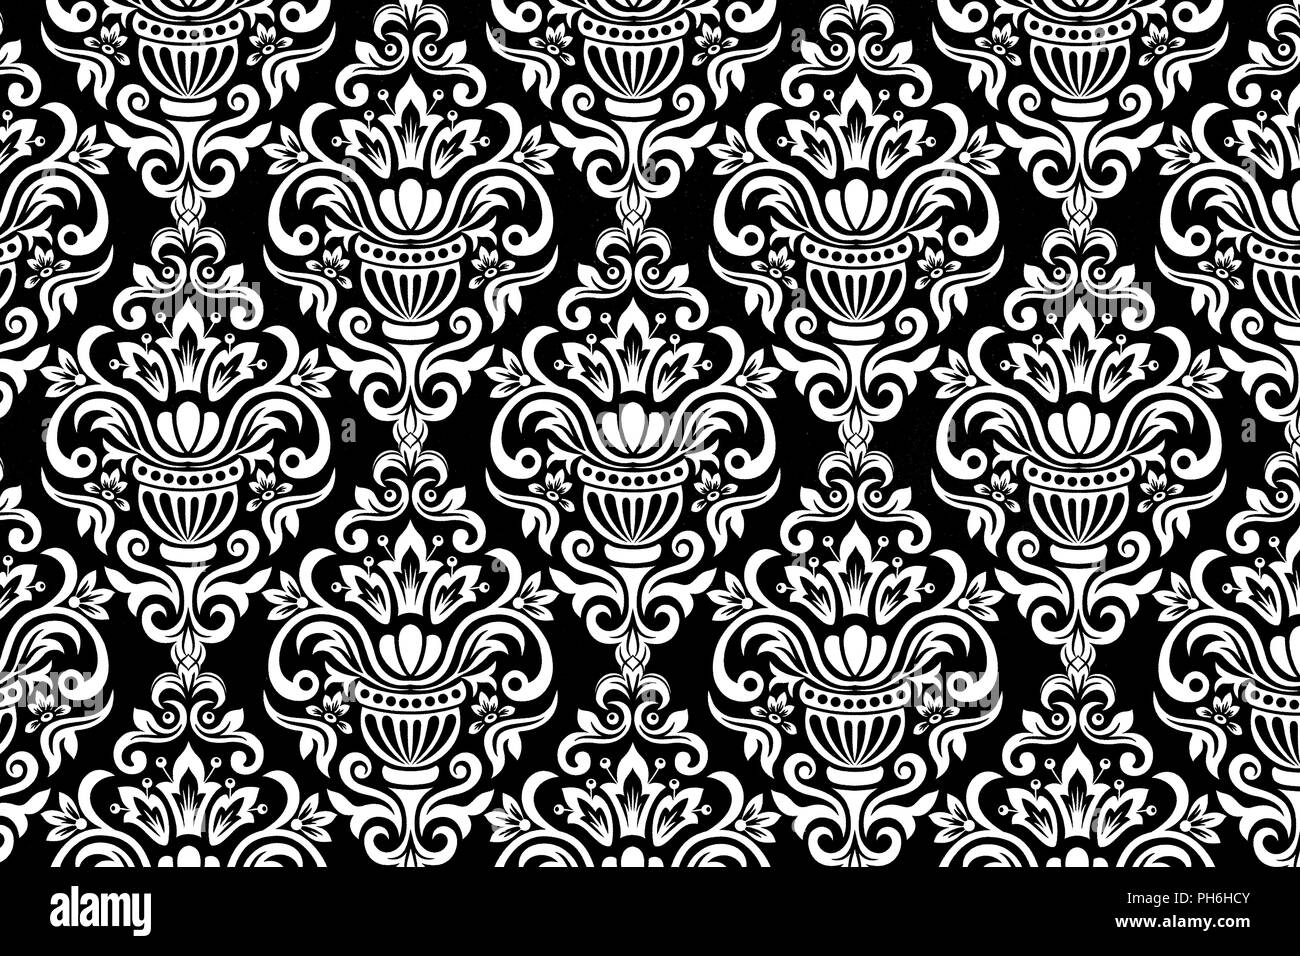 Flower pattern background, White and black floral ornament Stock Photo